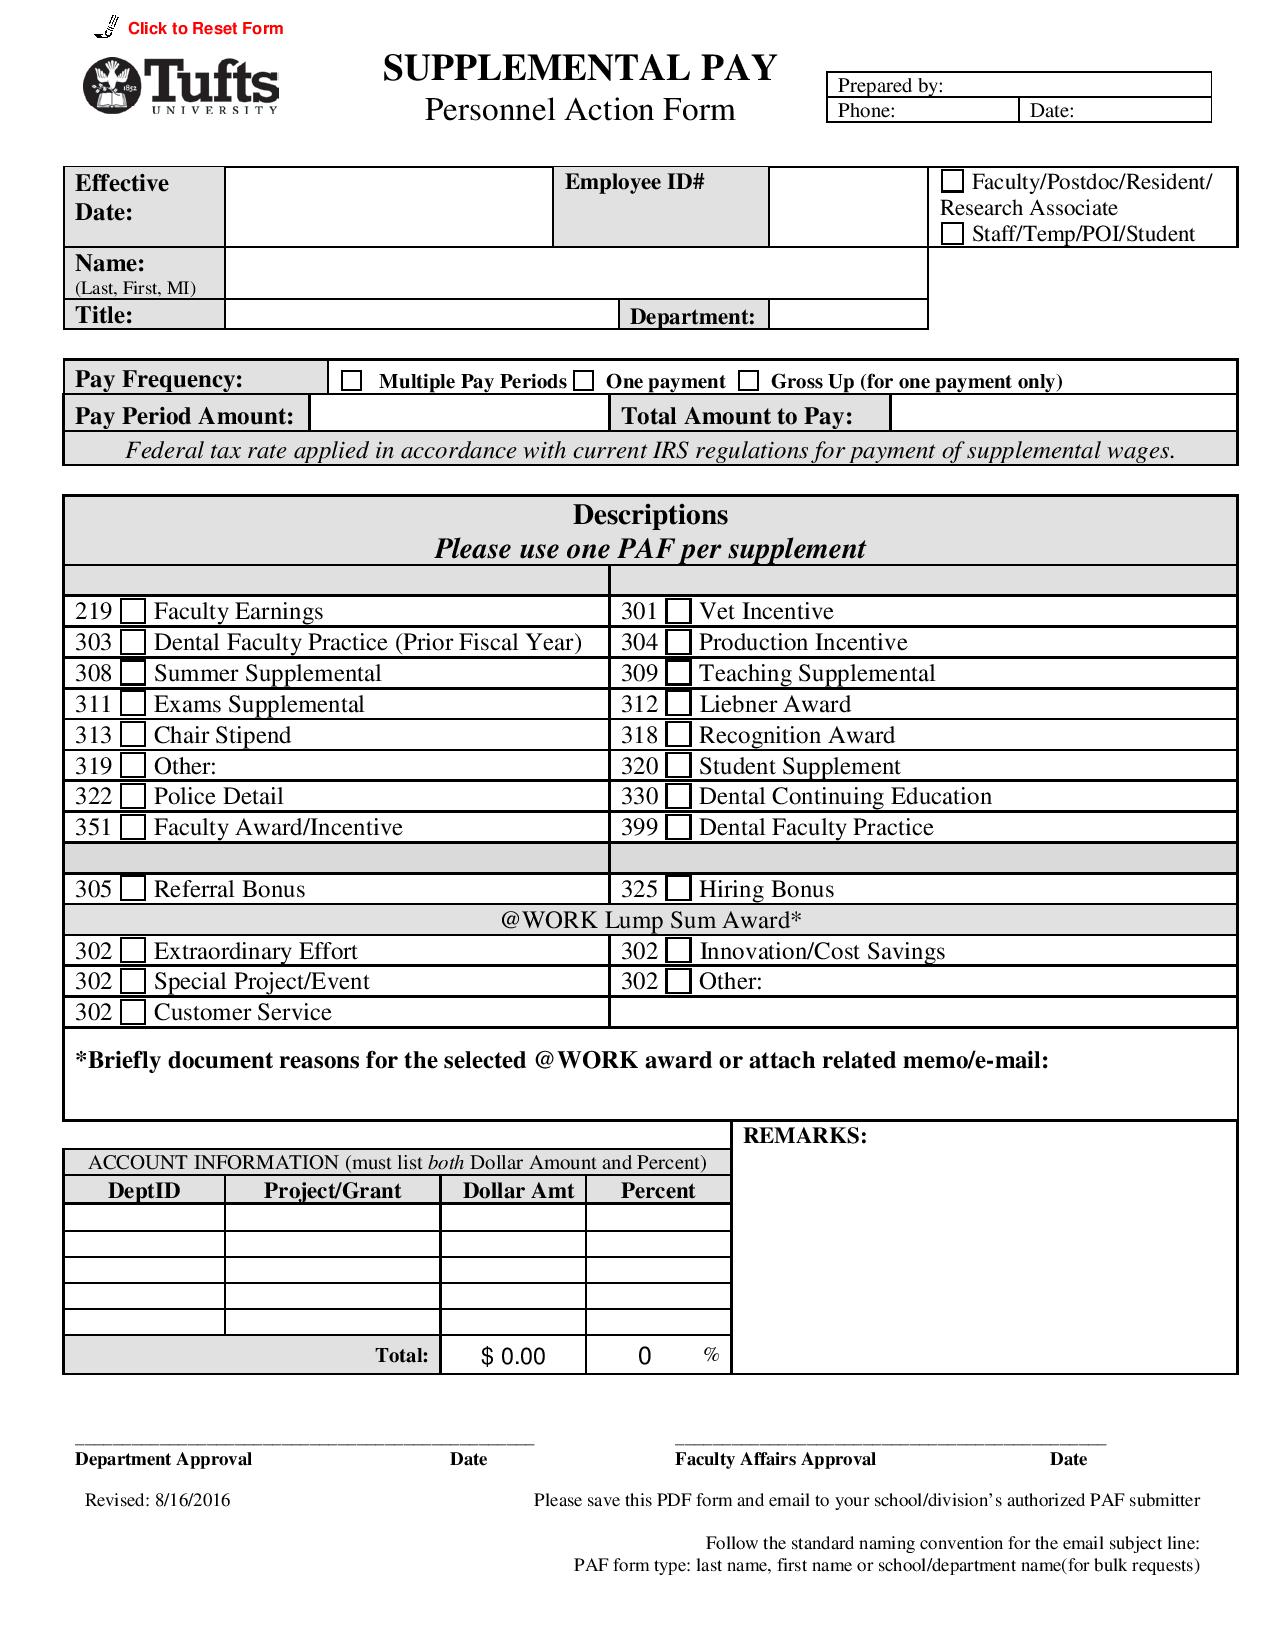 supplemental pay personnel action form page 001